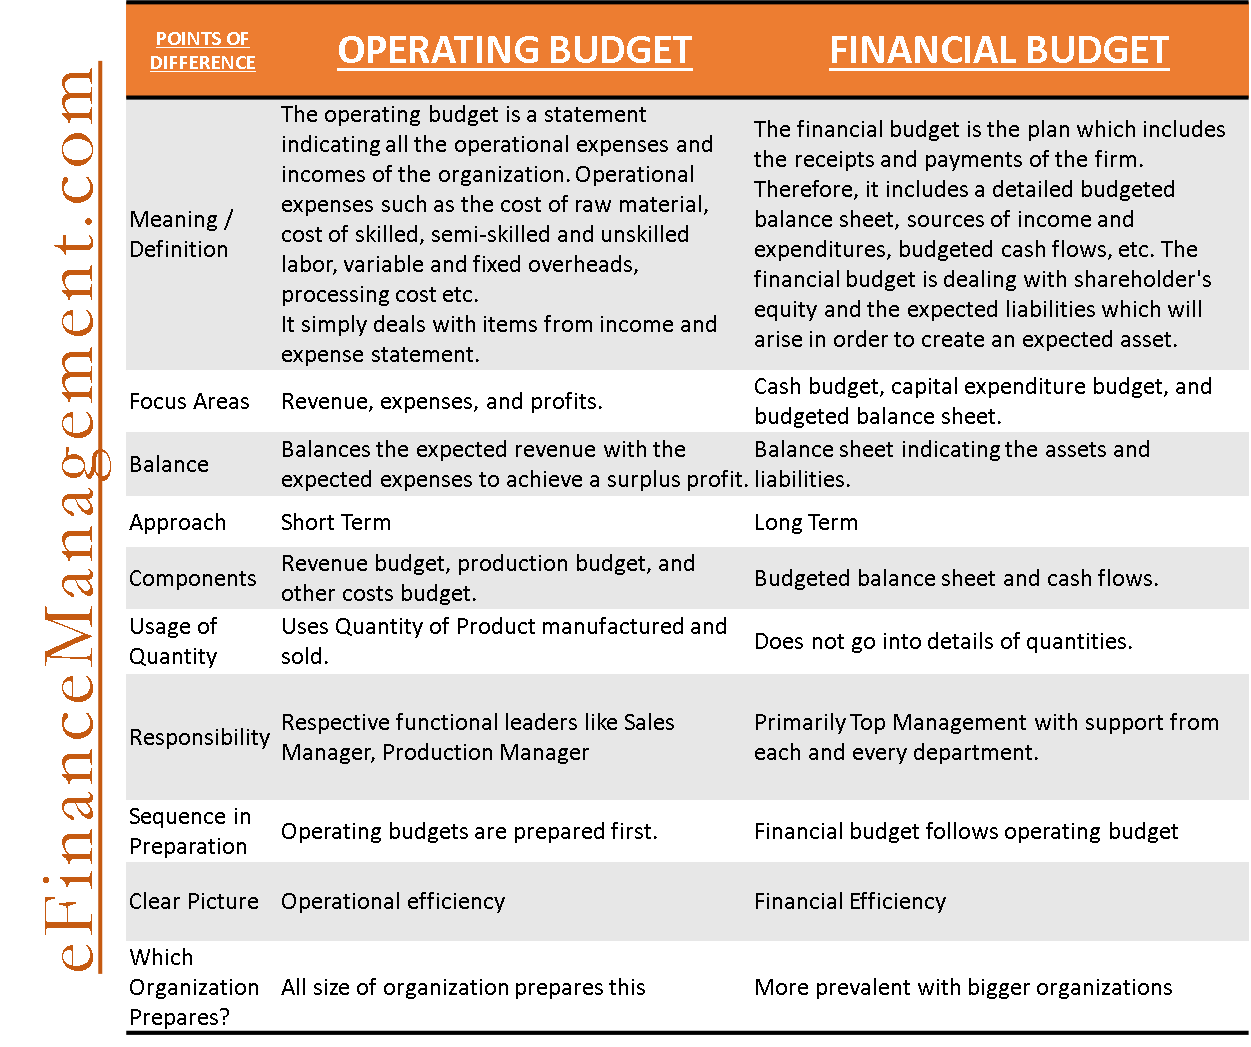 How many components are there in financial plan?